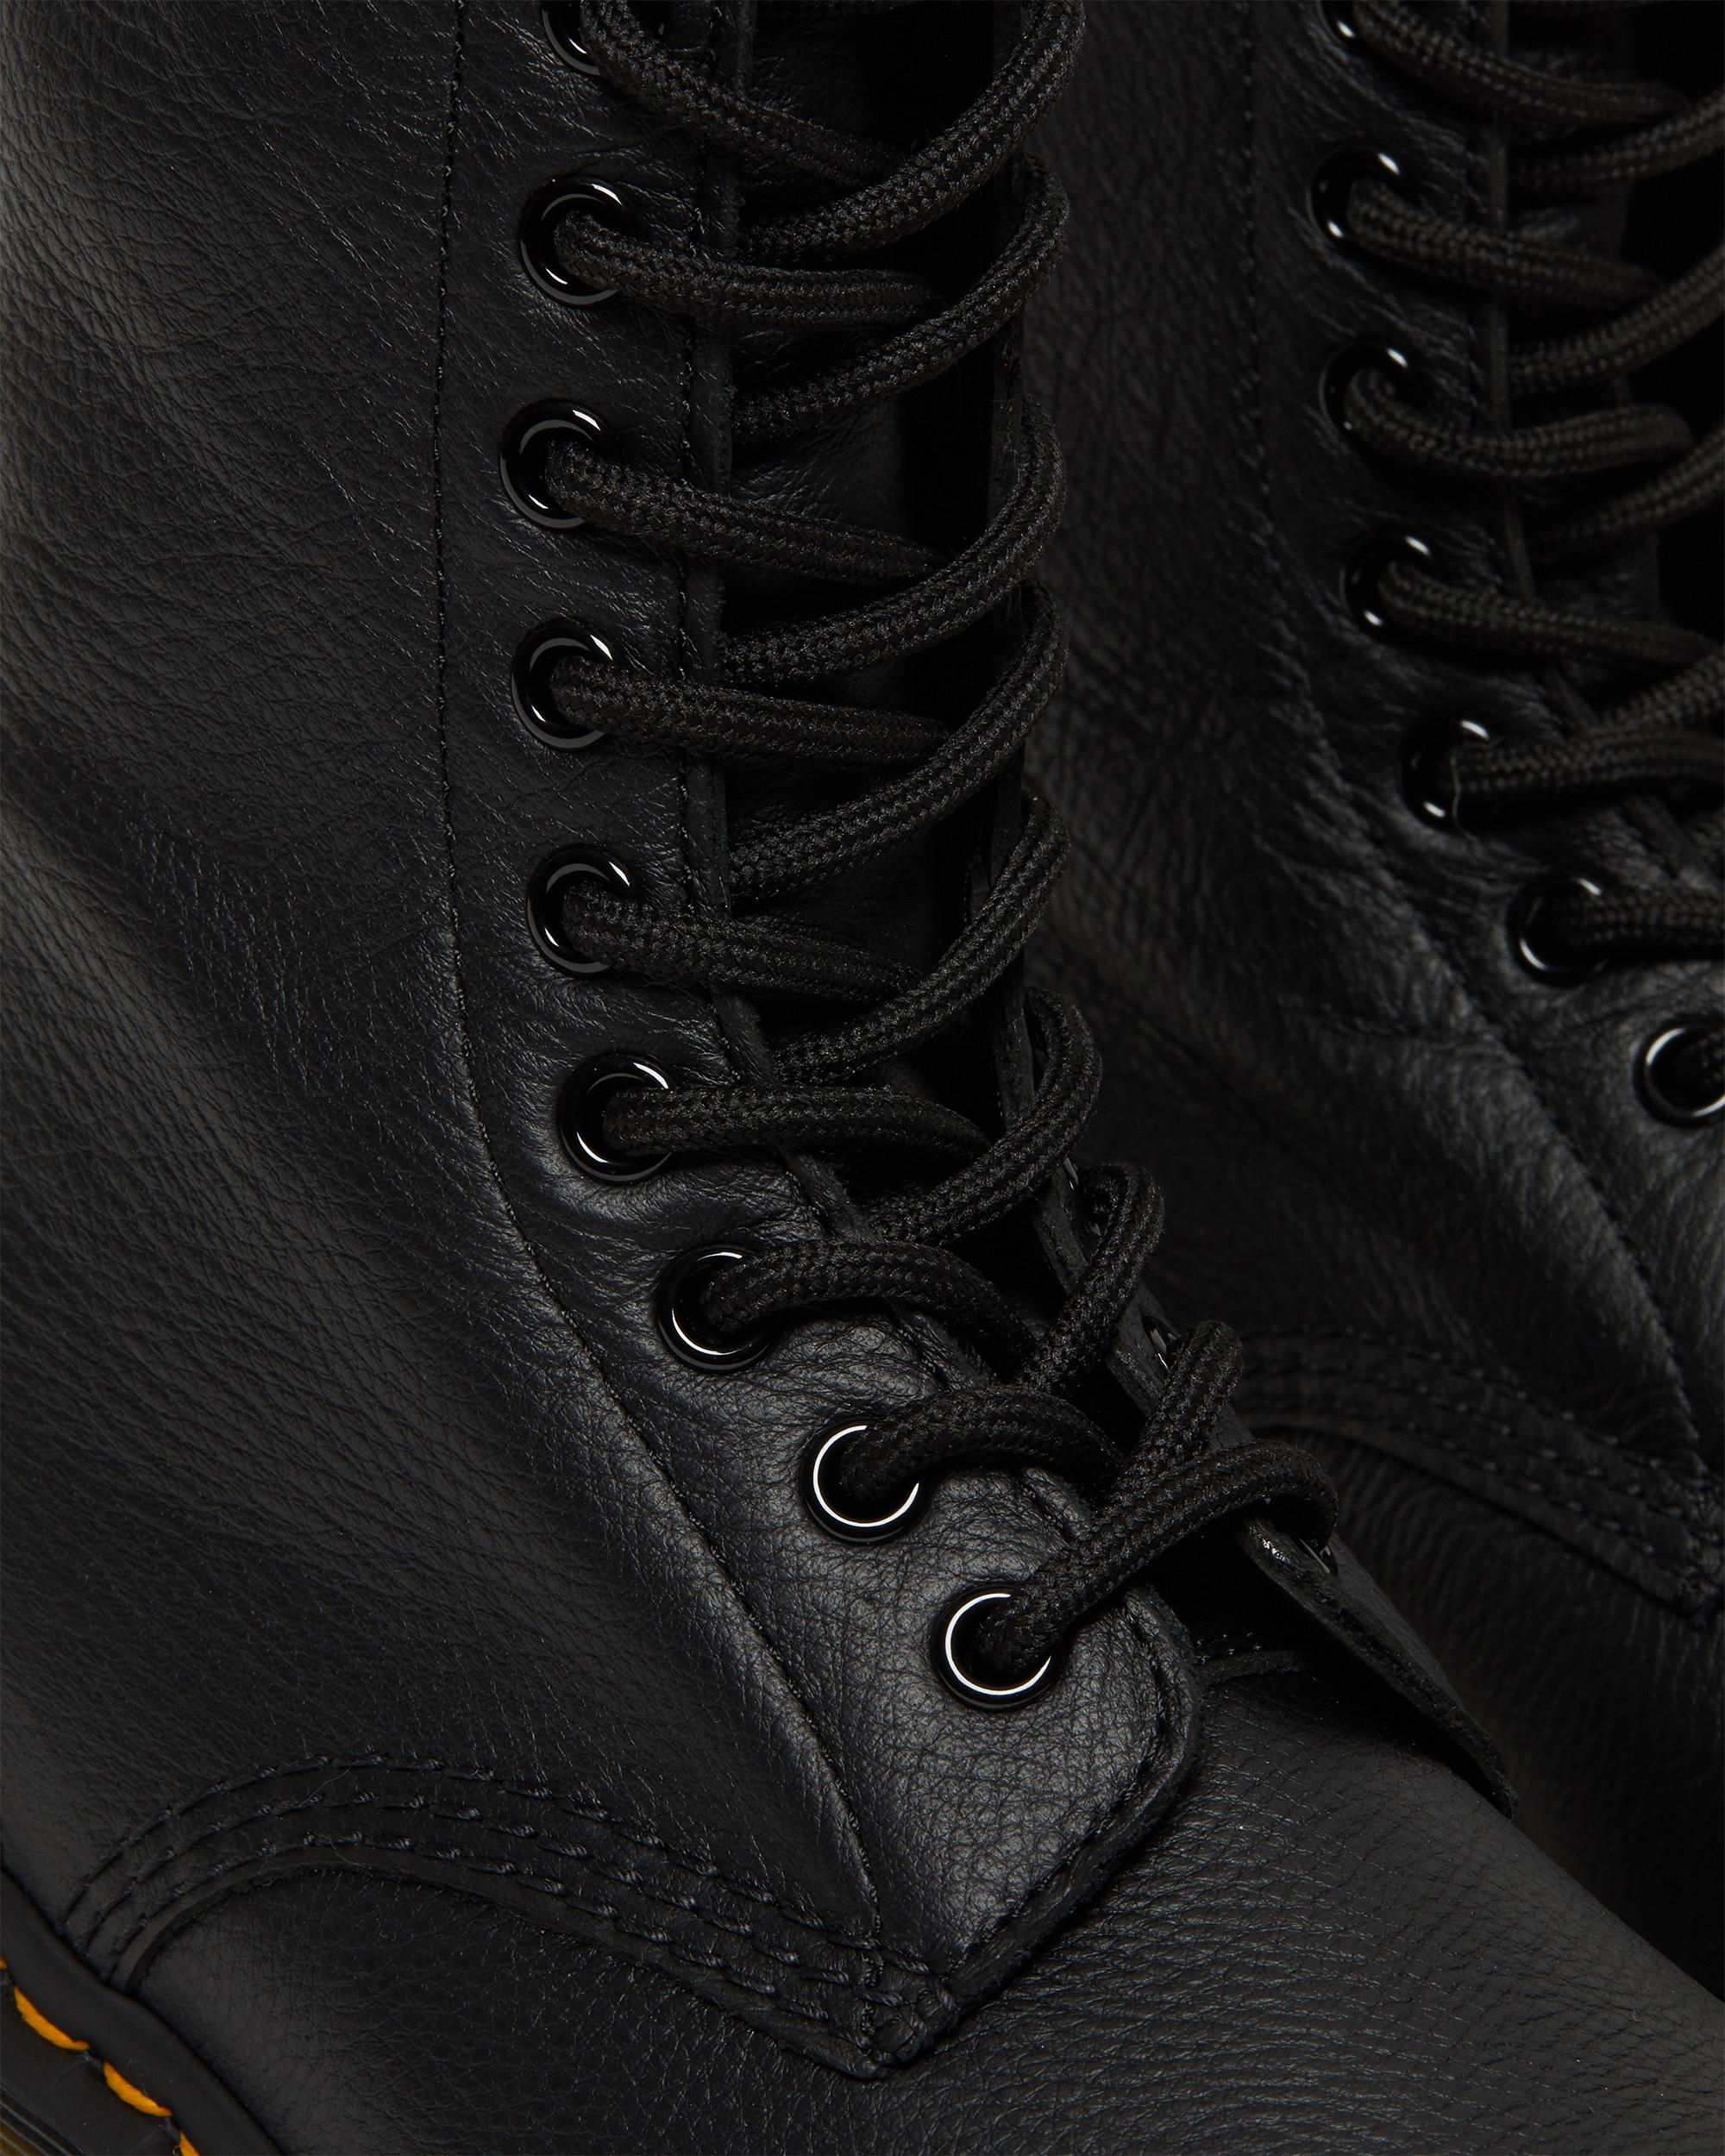 1490 VIRGINIA LEATHER HIGH BOOTS | Dr 